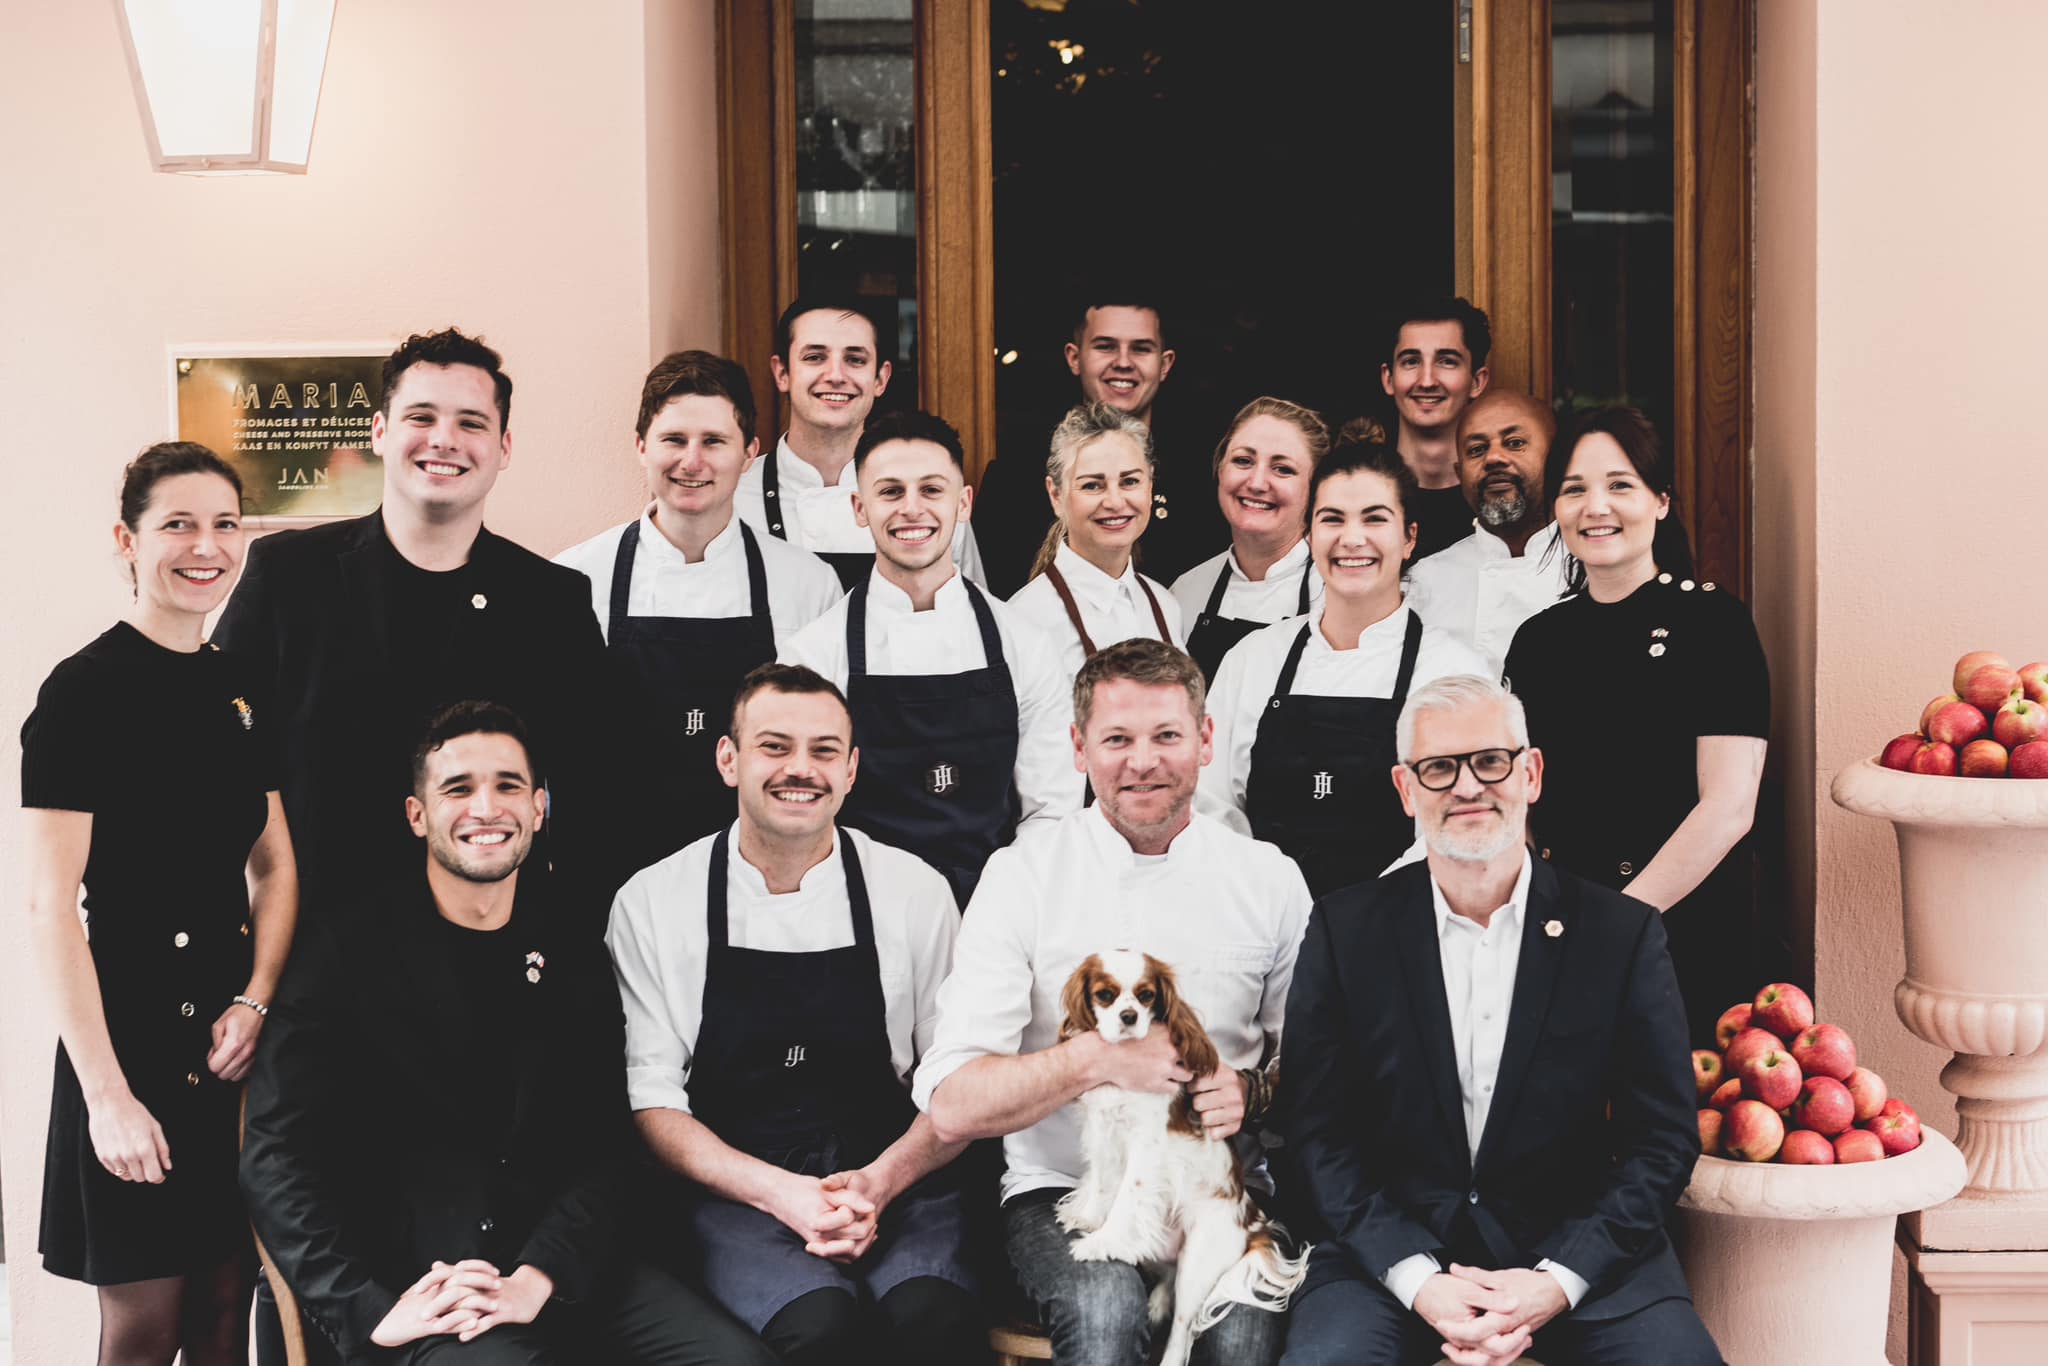 South African restaurant in France awarded Michelin star for 8th year in a row